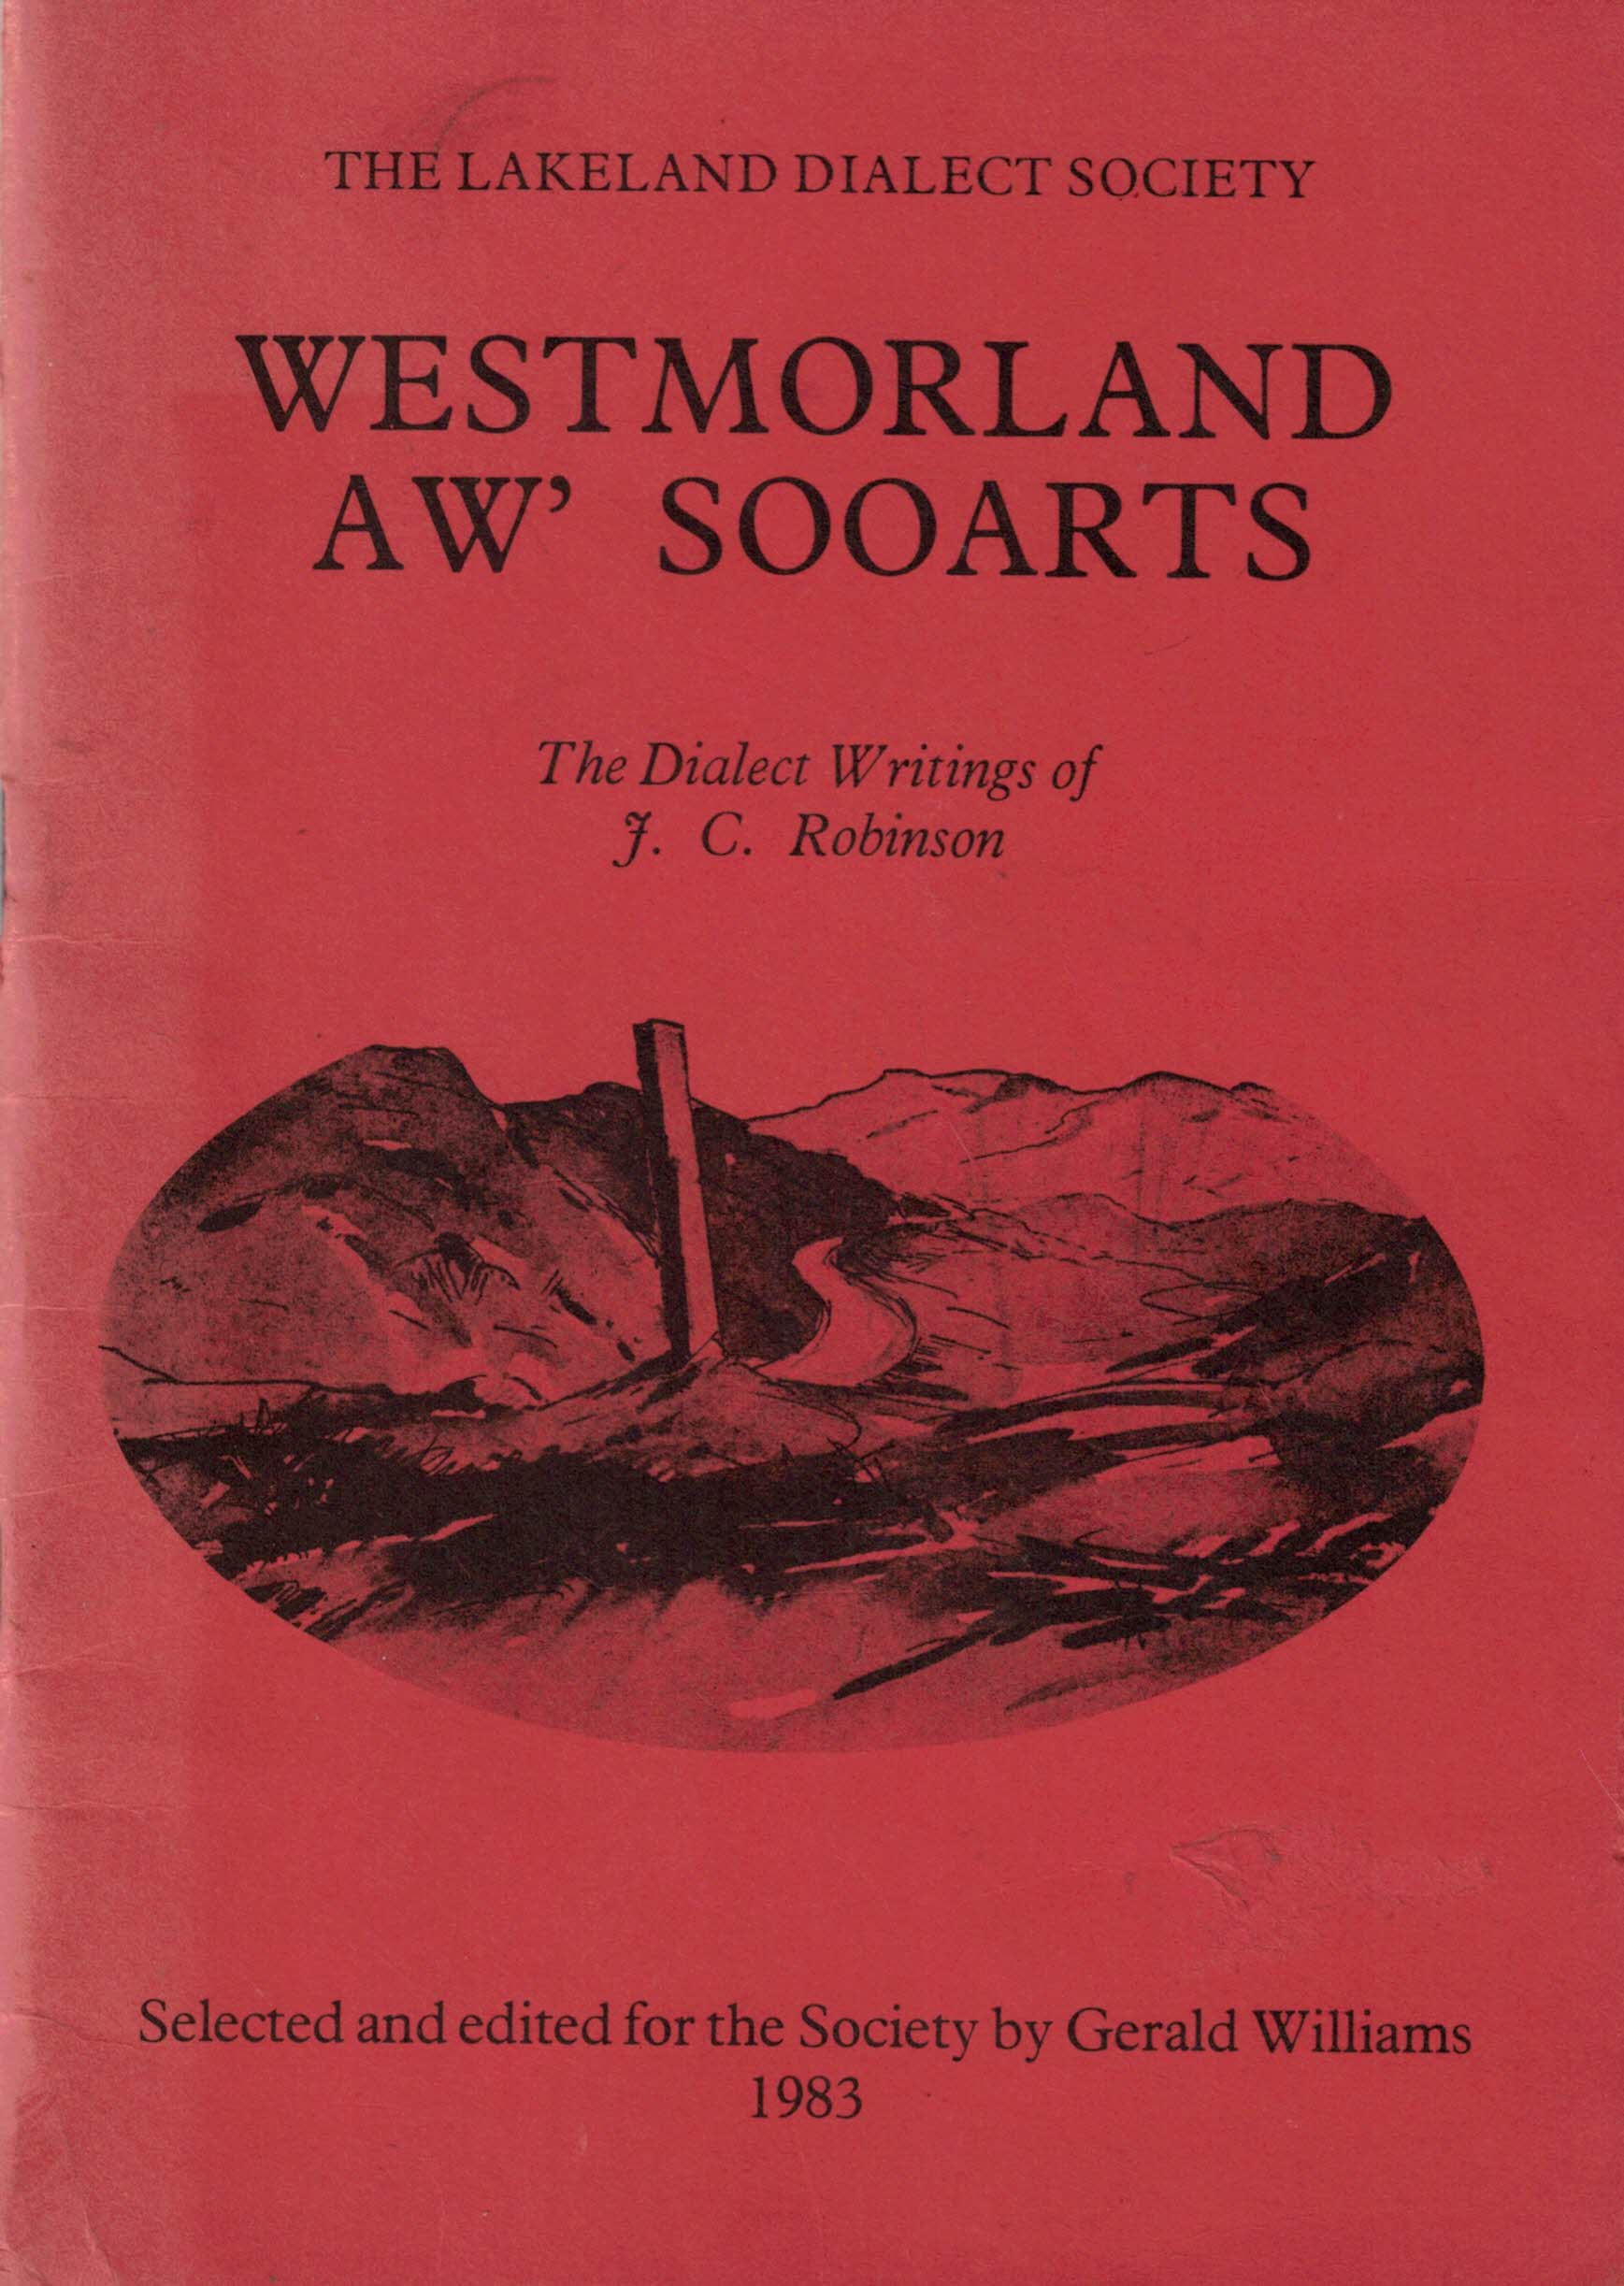 Westmorland aw' Sooarts. The Dialect Writings of J C Robinson.